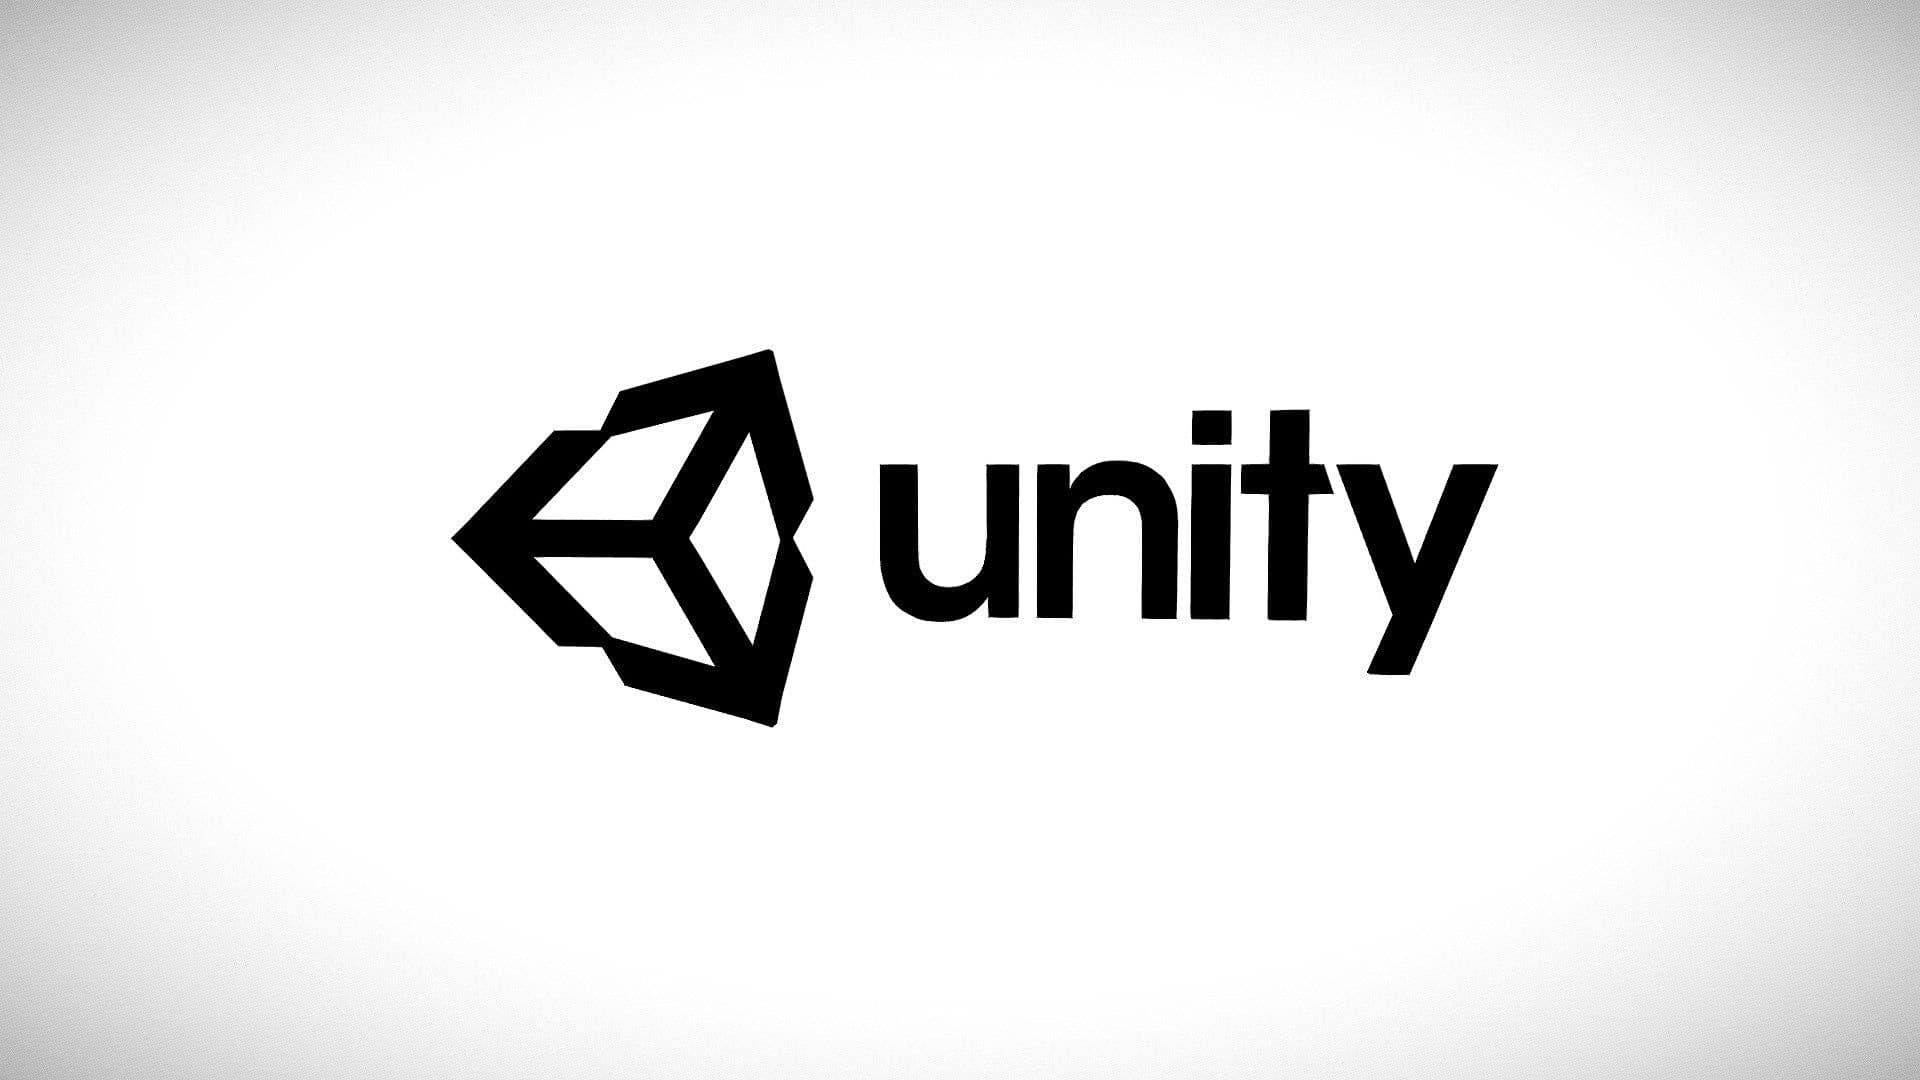 Unity considering $17.5b offer from mobile tech company AppLovin